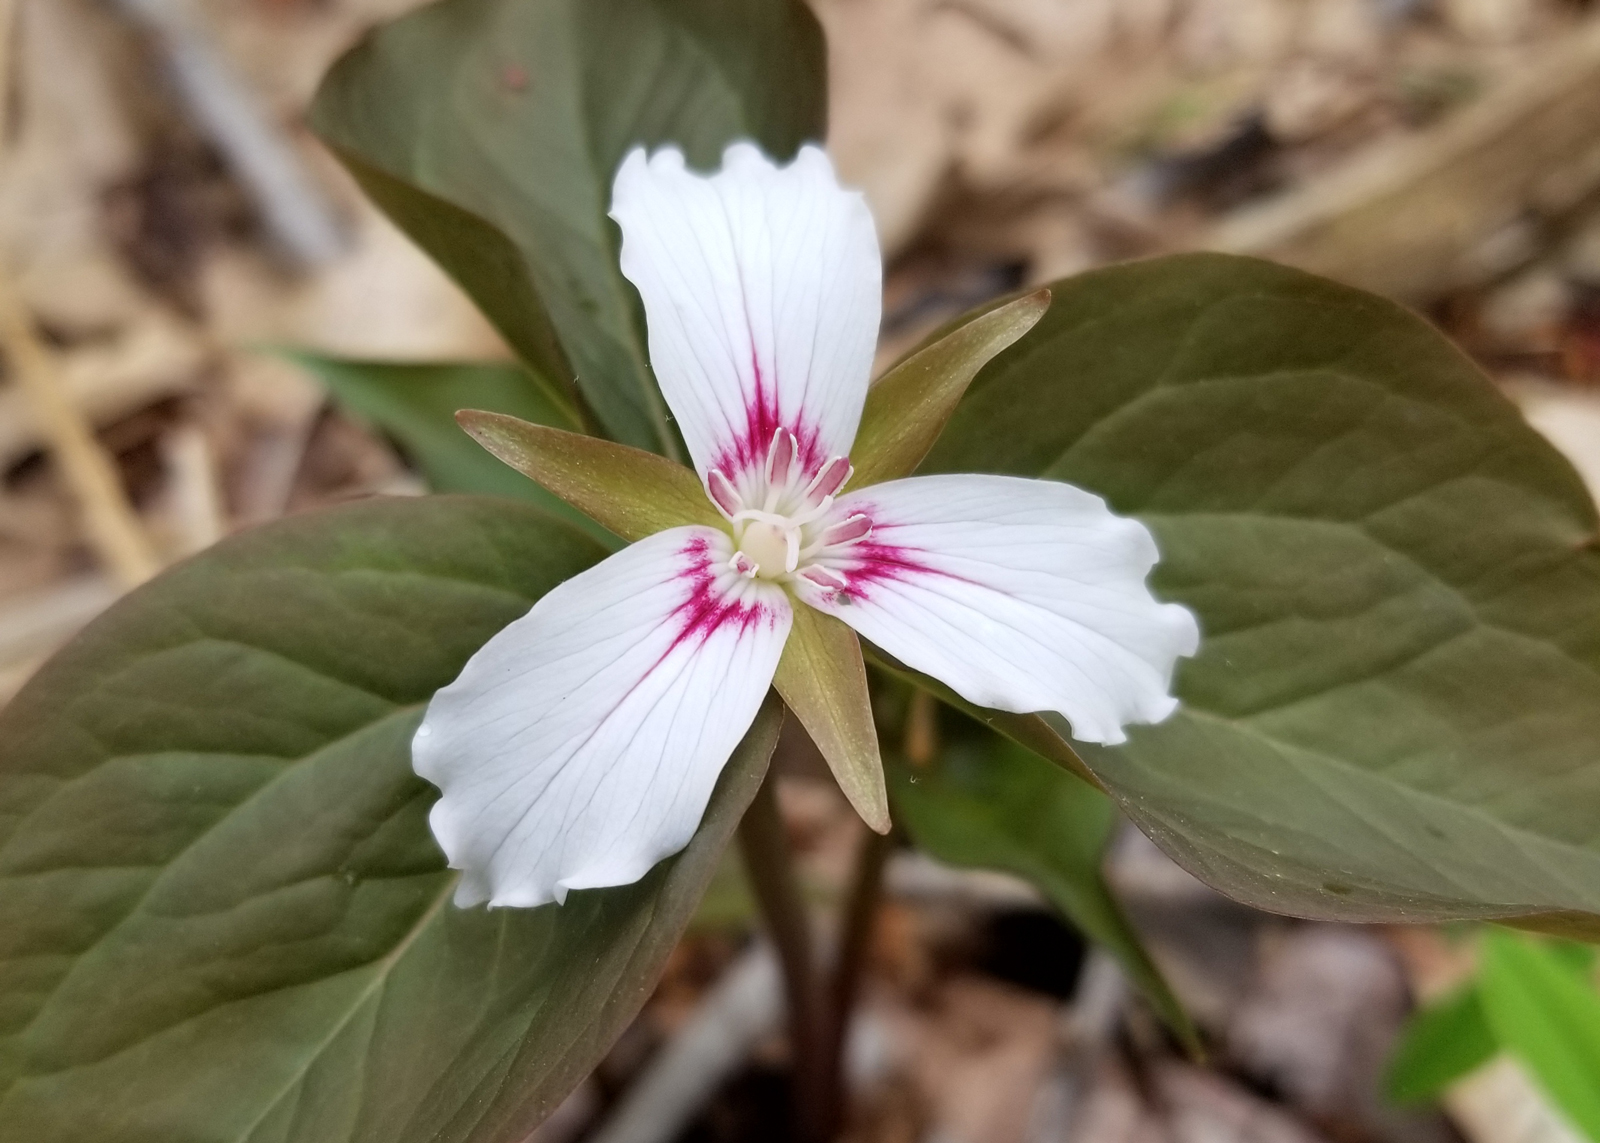 Trillium flower with dead leaves in background